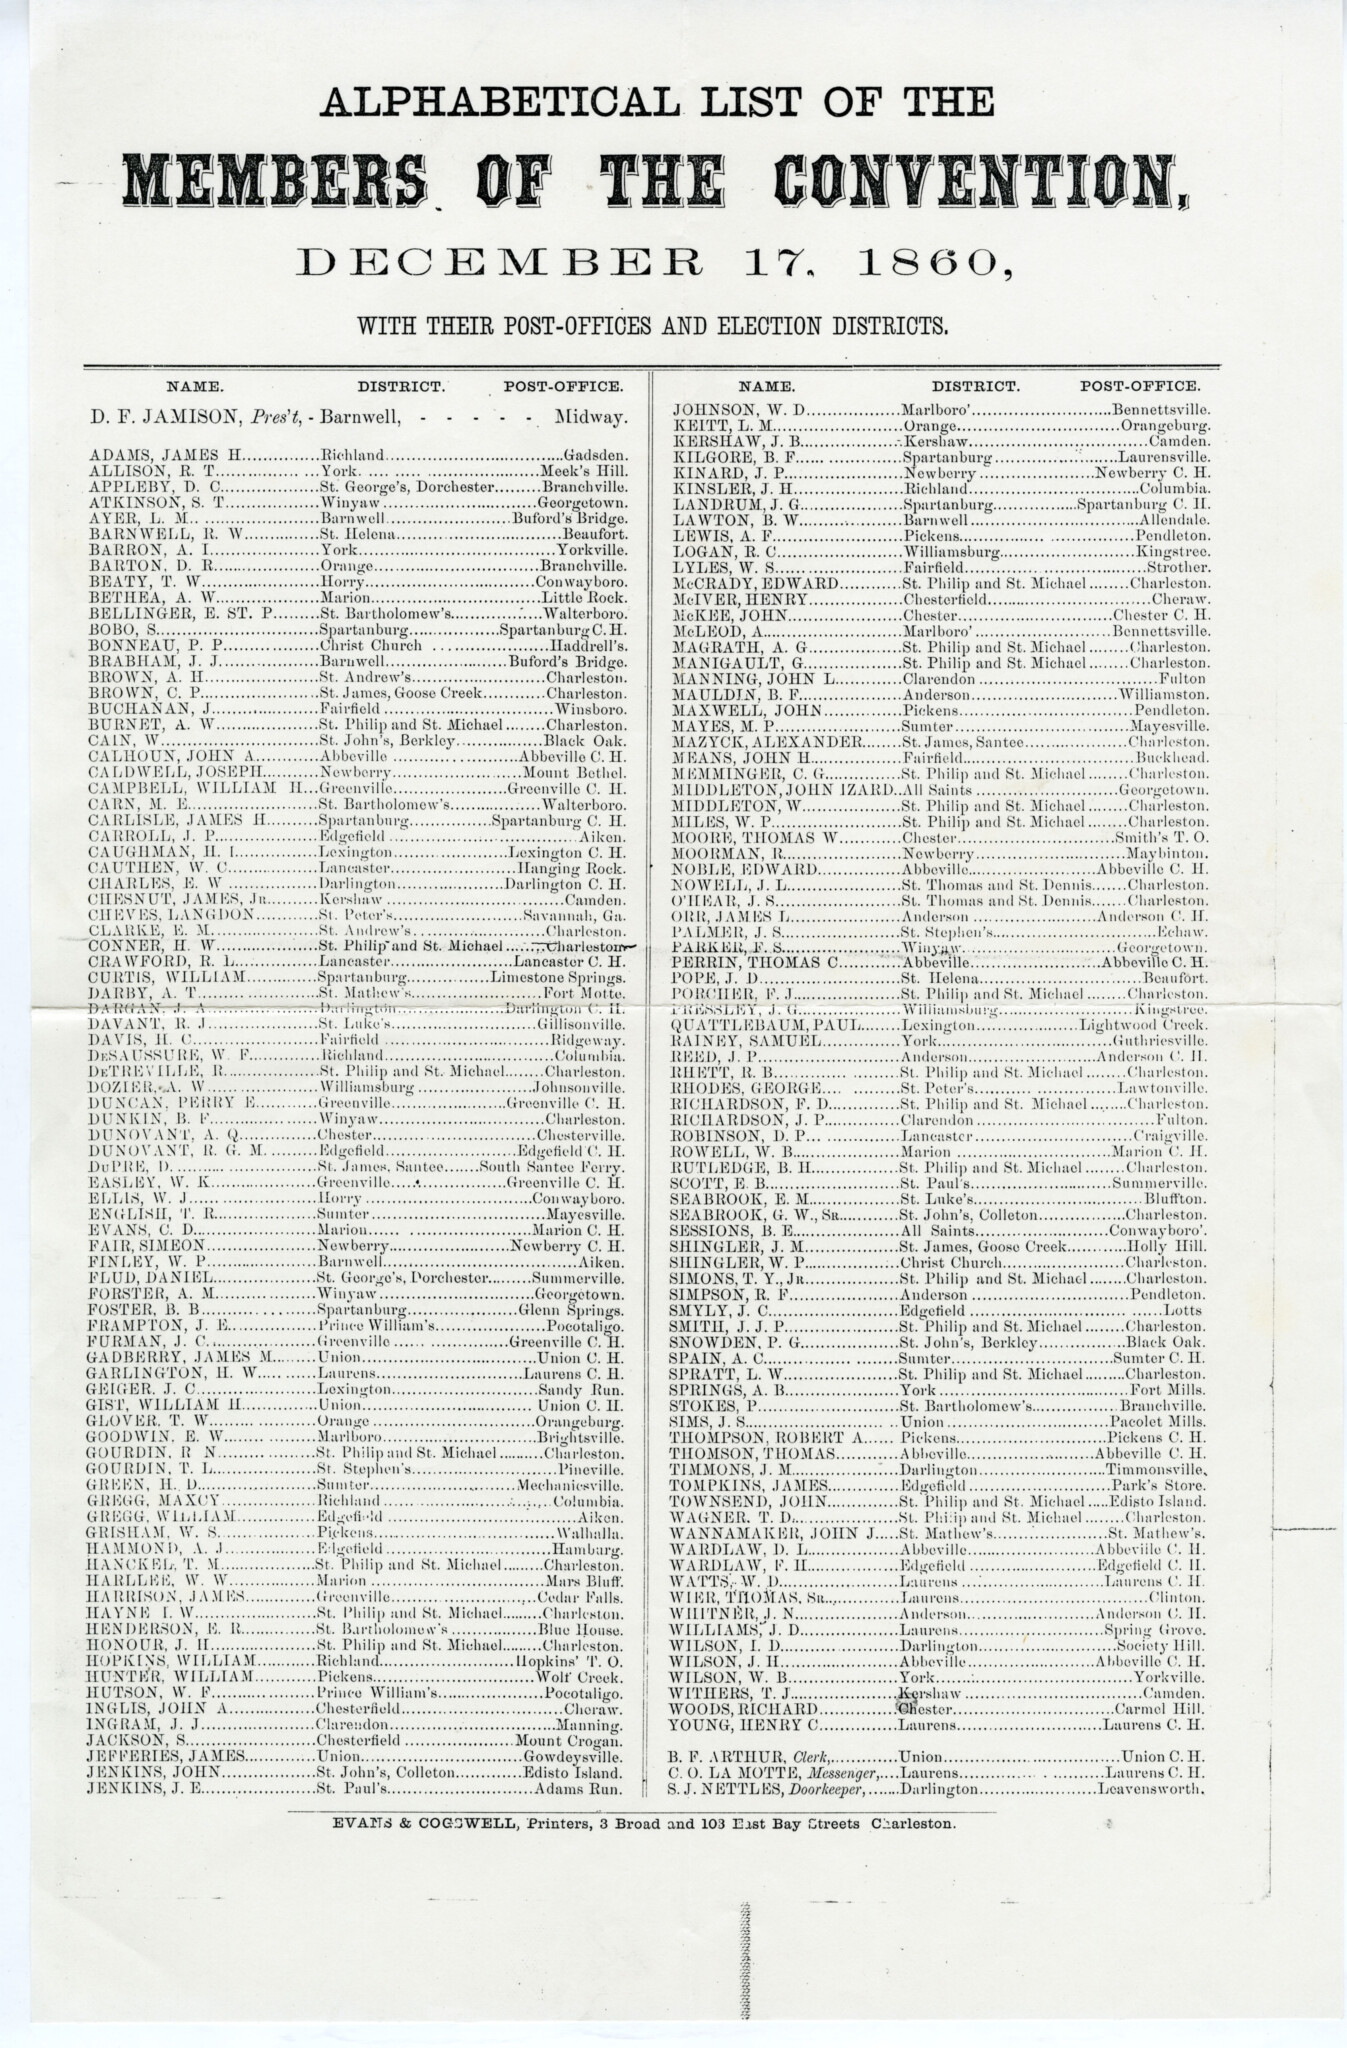 1860 LIST OF DELEGATES TO SC SECESSION CONVENTION - WU PETTUS ARCHIVES